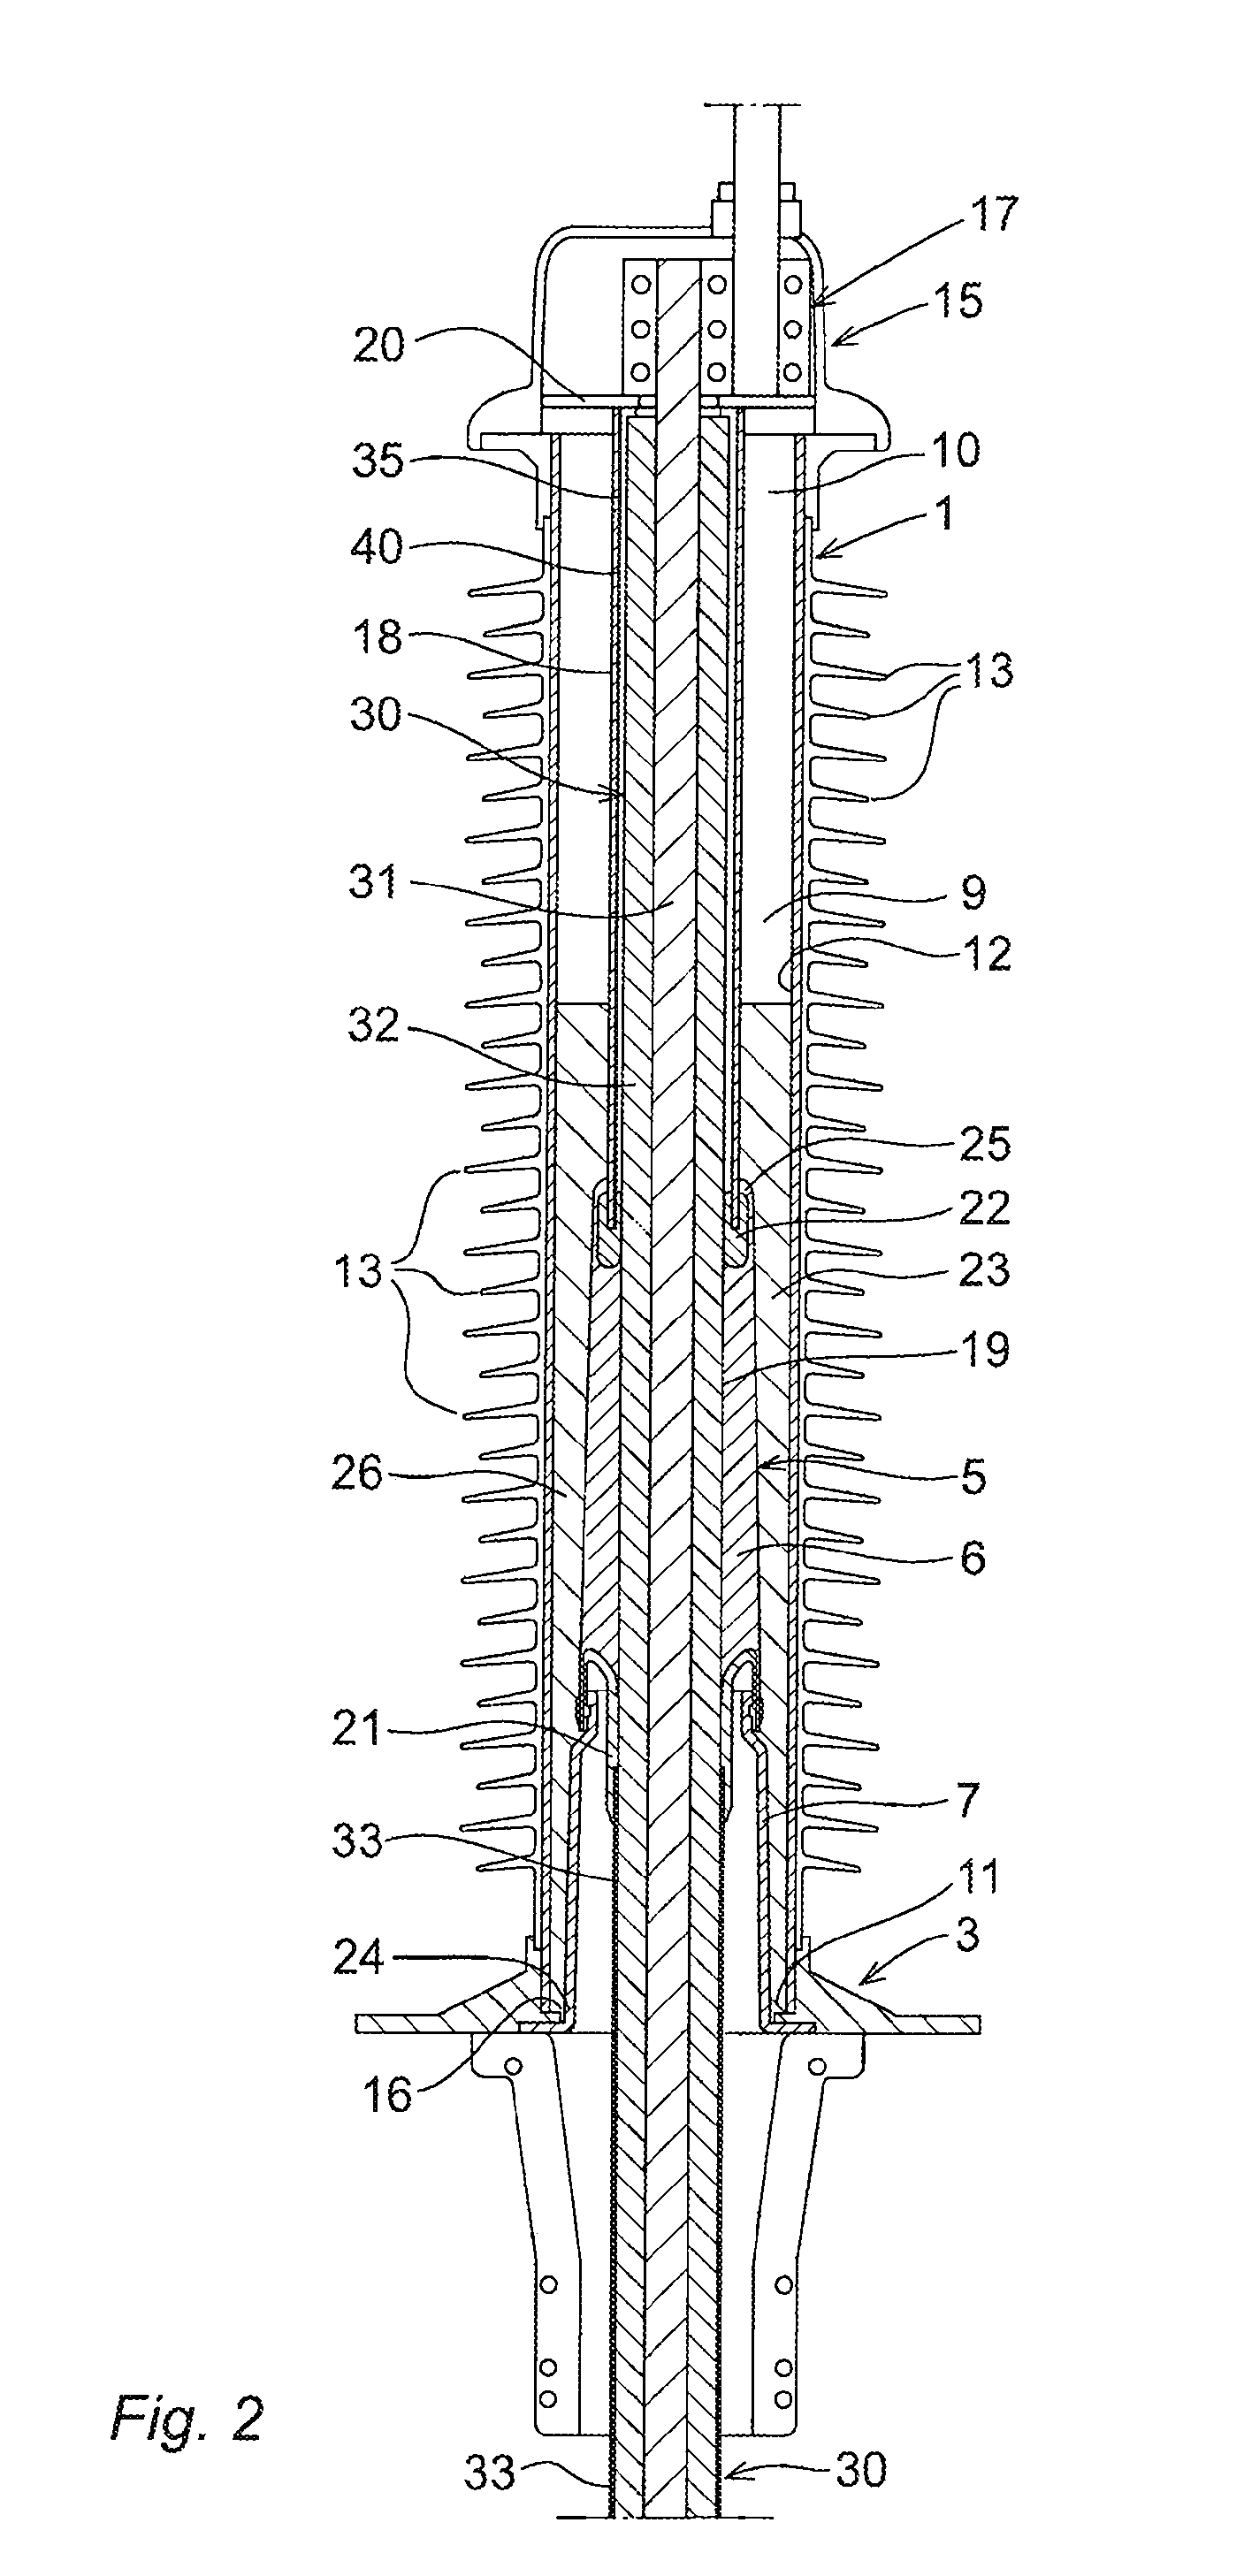 Cable Termination Device, A Method For Prefabricating A Cable Termination Device And A Method For Achieving A Cable Termination